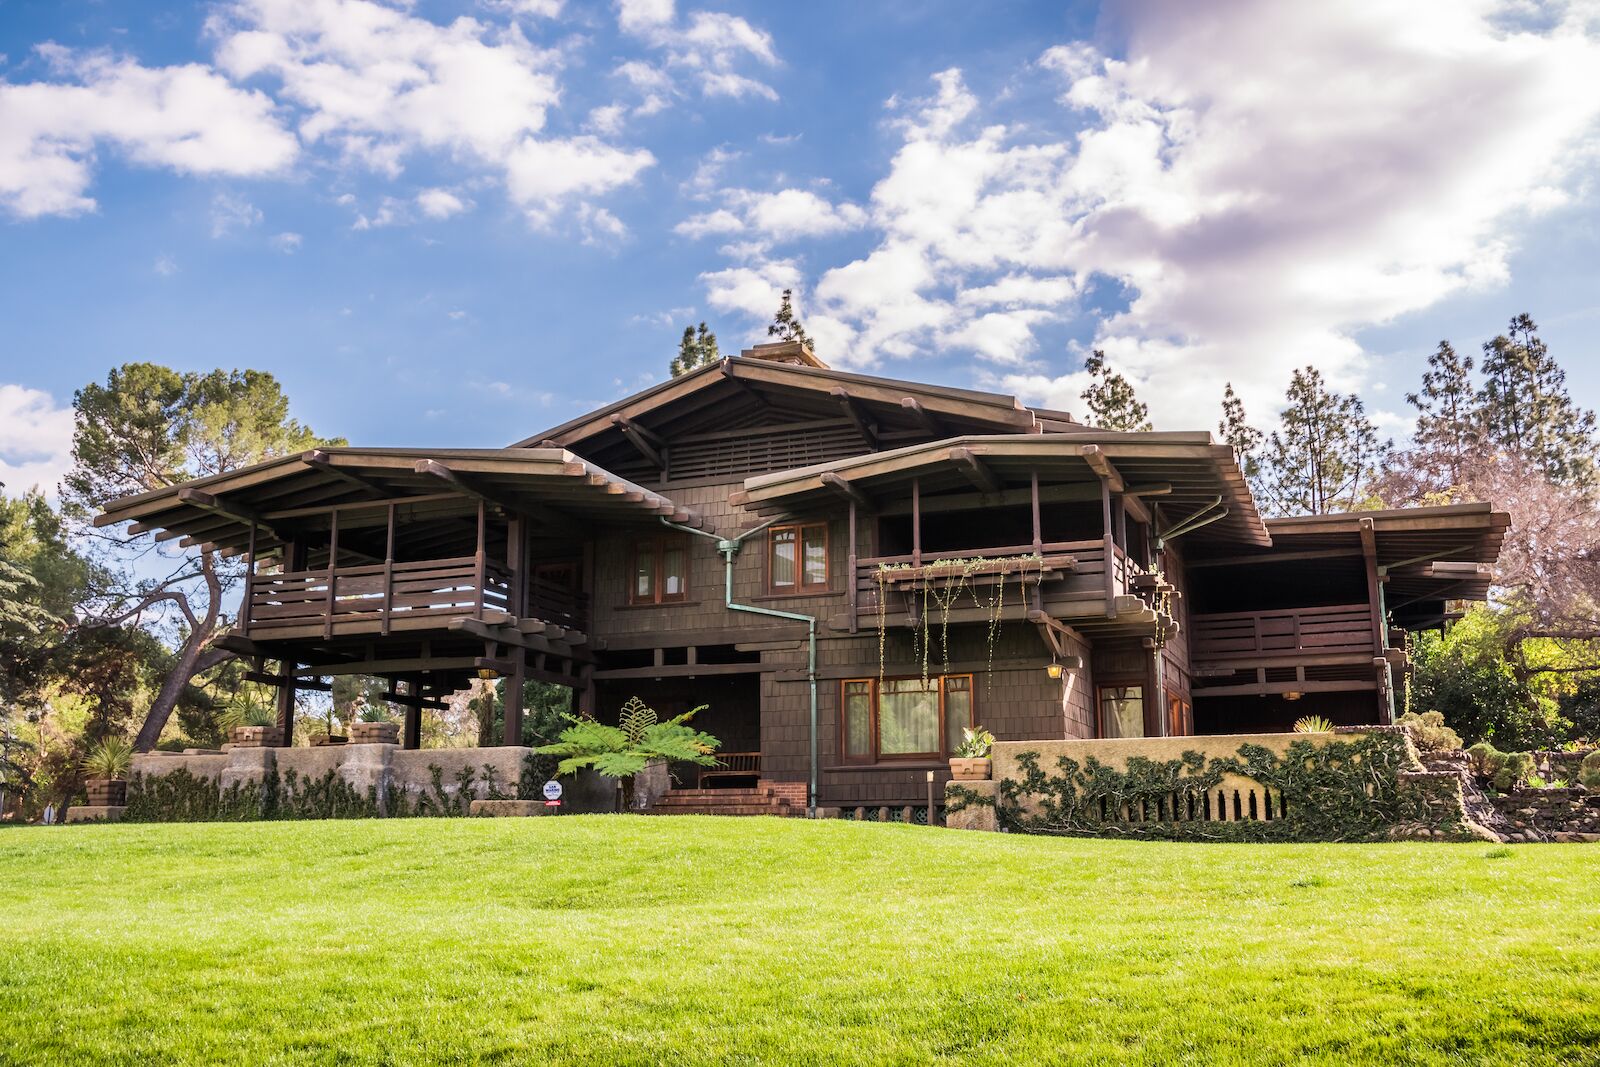 What to do in Pasadena: Visit The Gamble House